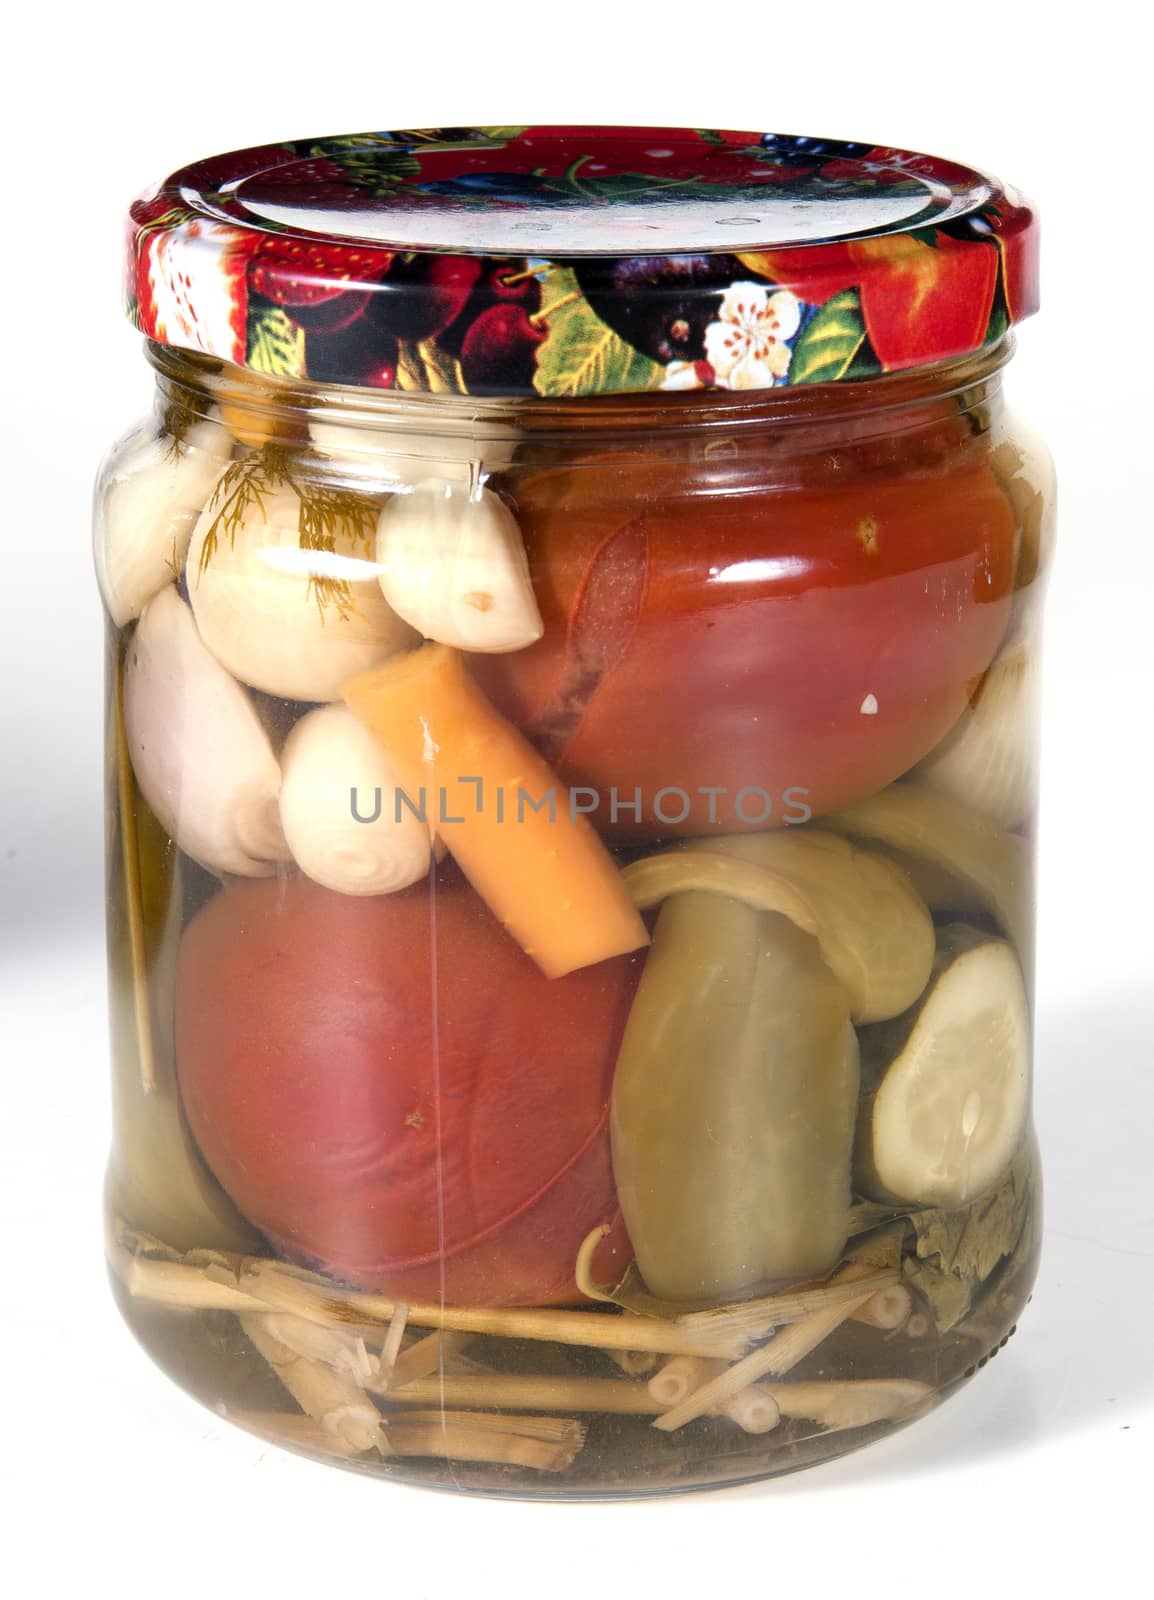 Homemade canned vegetables - very tasty products for the whole family